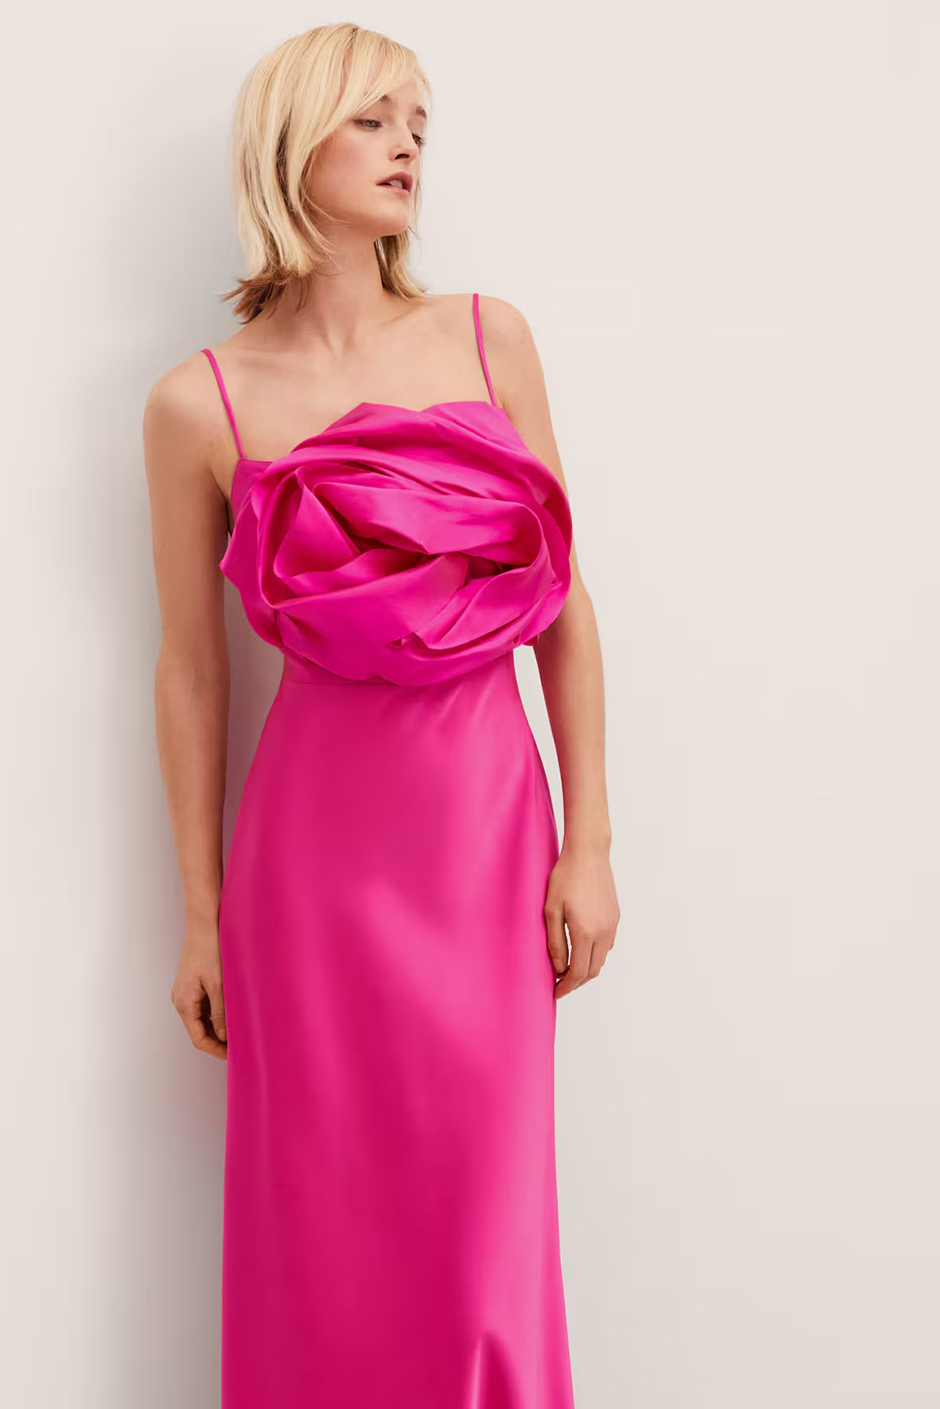 Pink wedding guest dress from Mango with satin material, maxi length and statement floral feature on chest